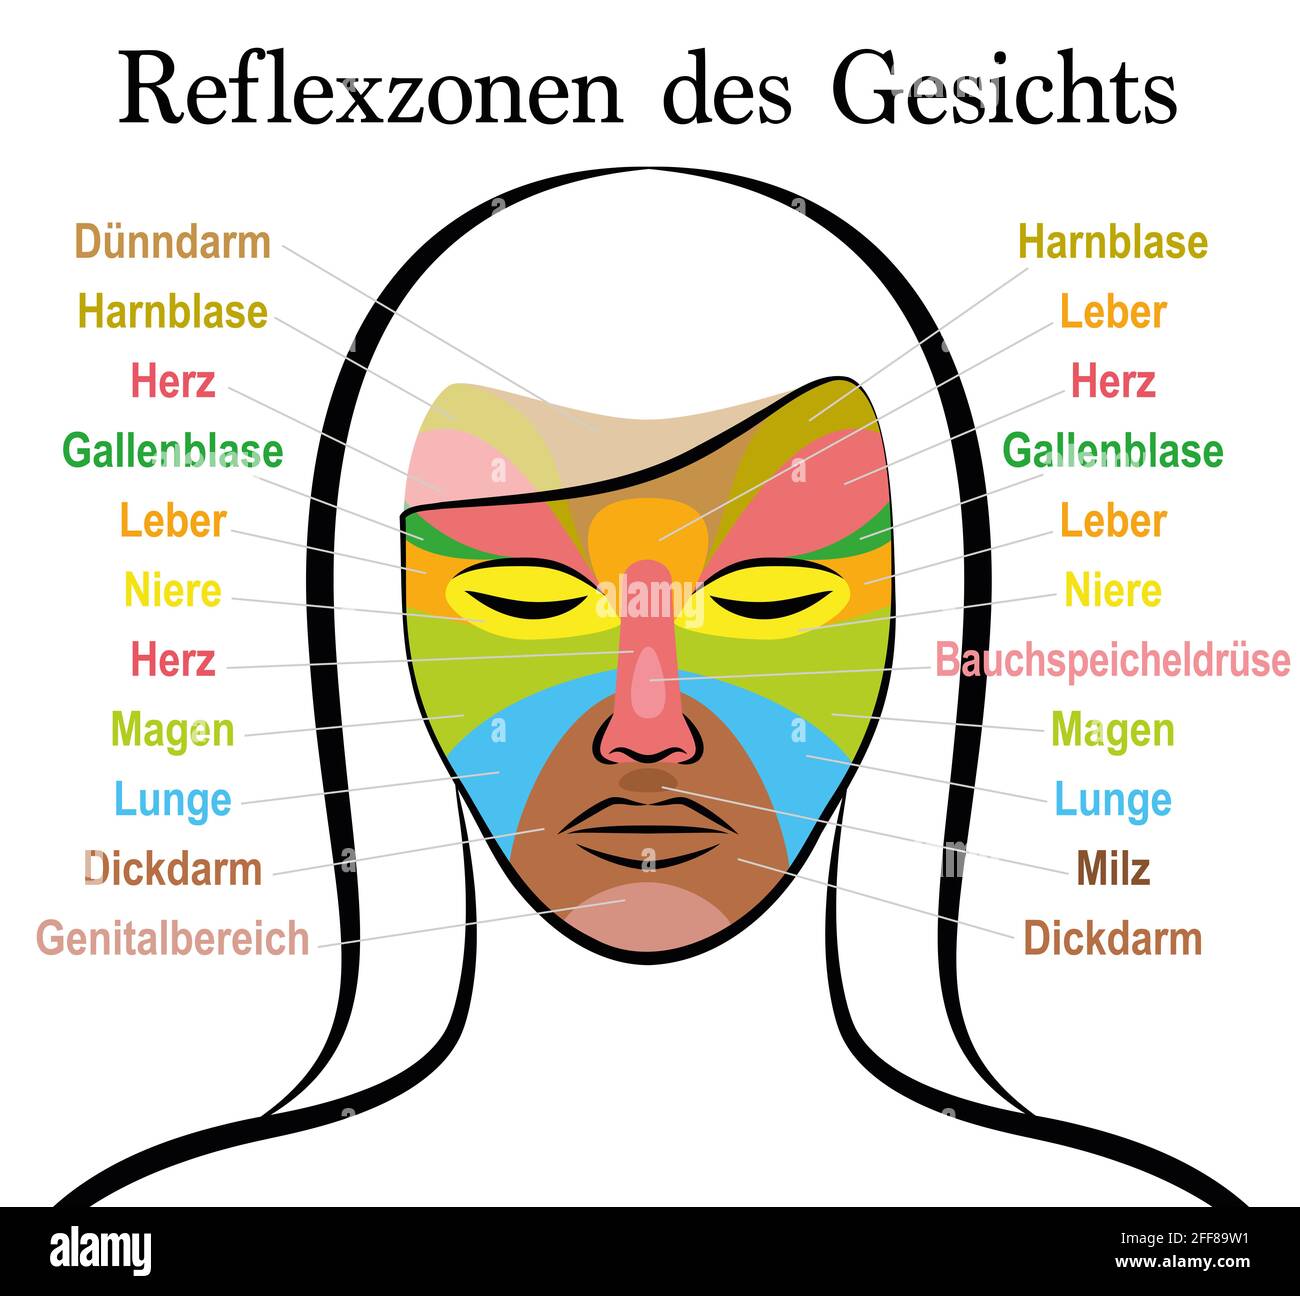 Face reflexology chart, german text, female face. Acupressure and physiotherapy health treatment. Zone massage chart with colored areas and names. Stock Photo